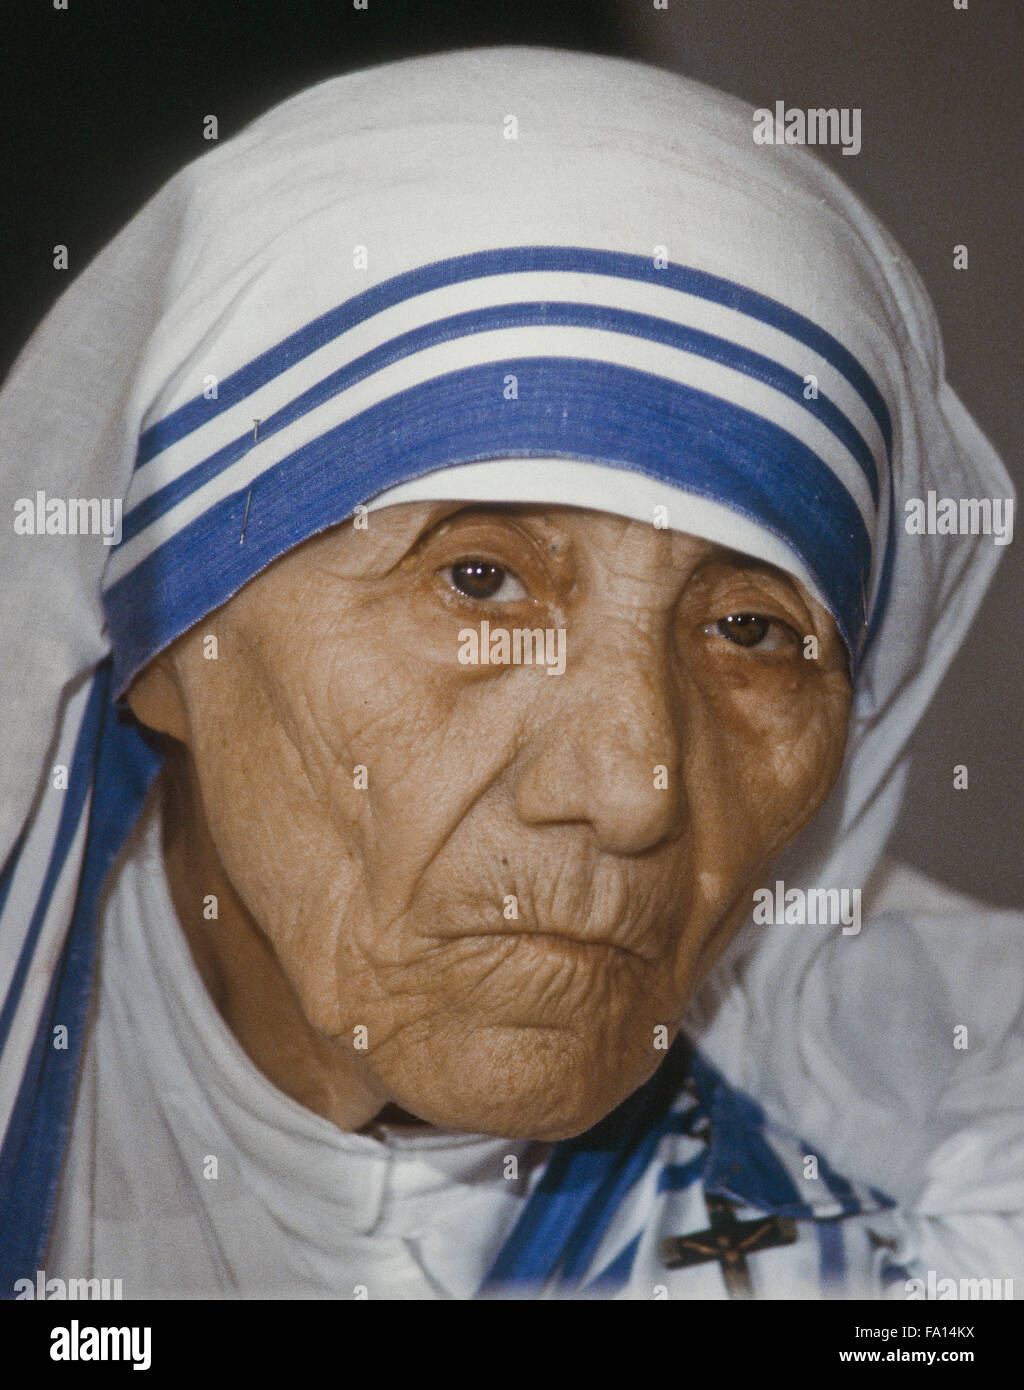 Washington, DC. 6-13-1986 Blessed Teresa of Calcutta, commonly known as Mother Teresa  a Roman Catholic religious sister and missionary who lived most of her life in India. She was born in today's Macedonia, with her family being of Albanian descent originating in Kosovo. Mother Teresa founded the Missionaries of Charity, a Roman Catholic religious congregation. Credit: Mark Reinstein Stock Photo